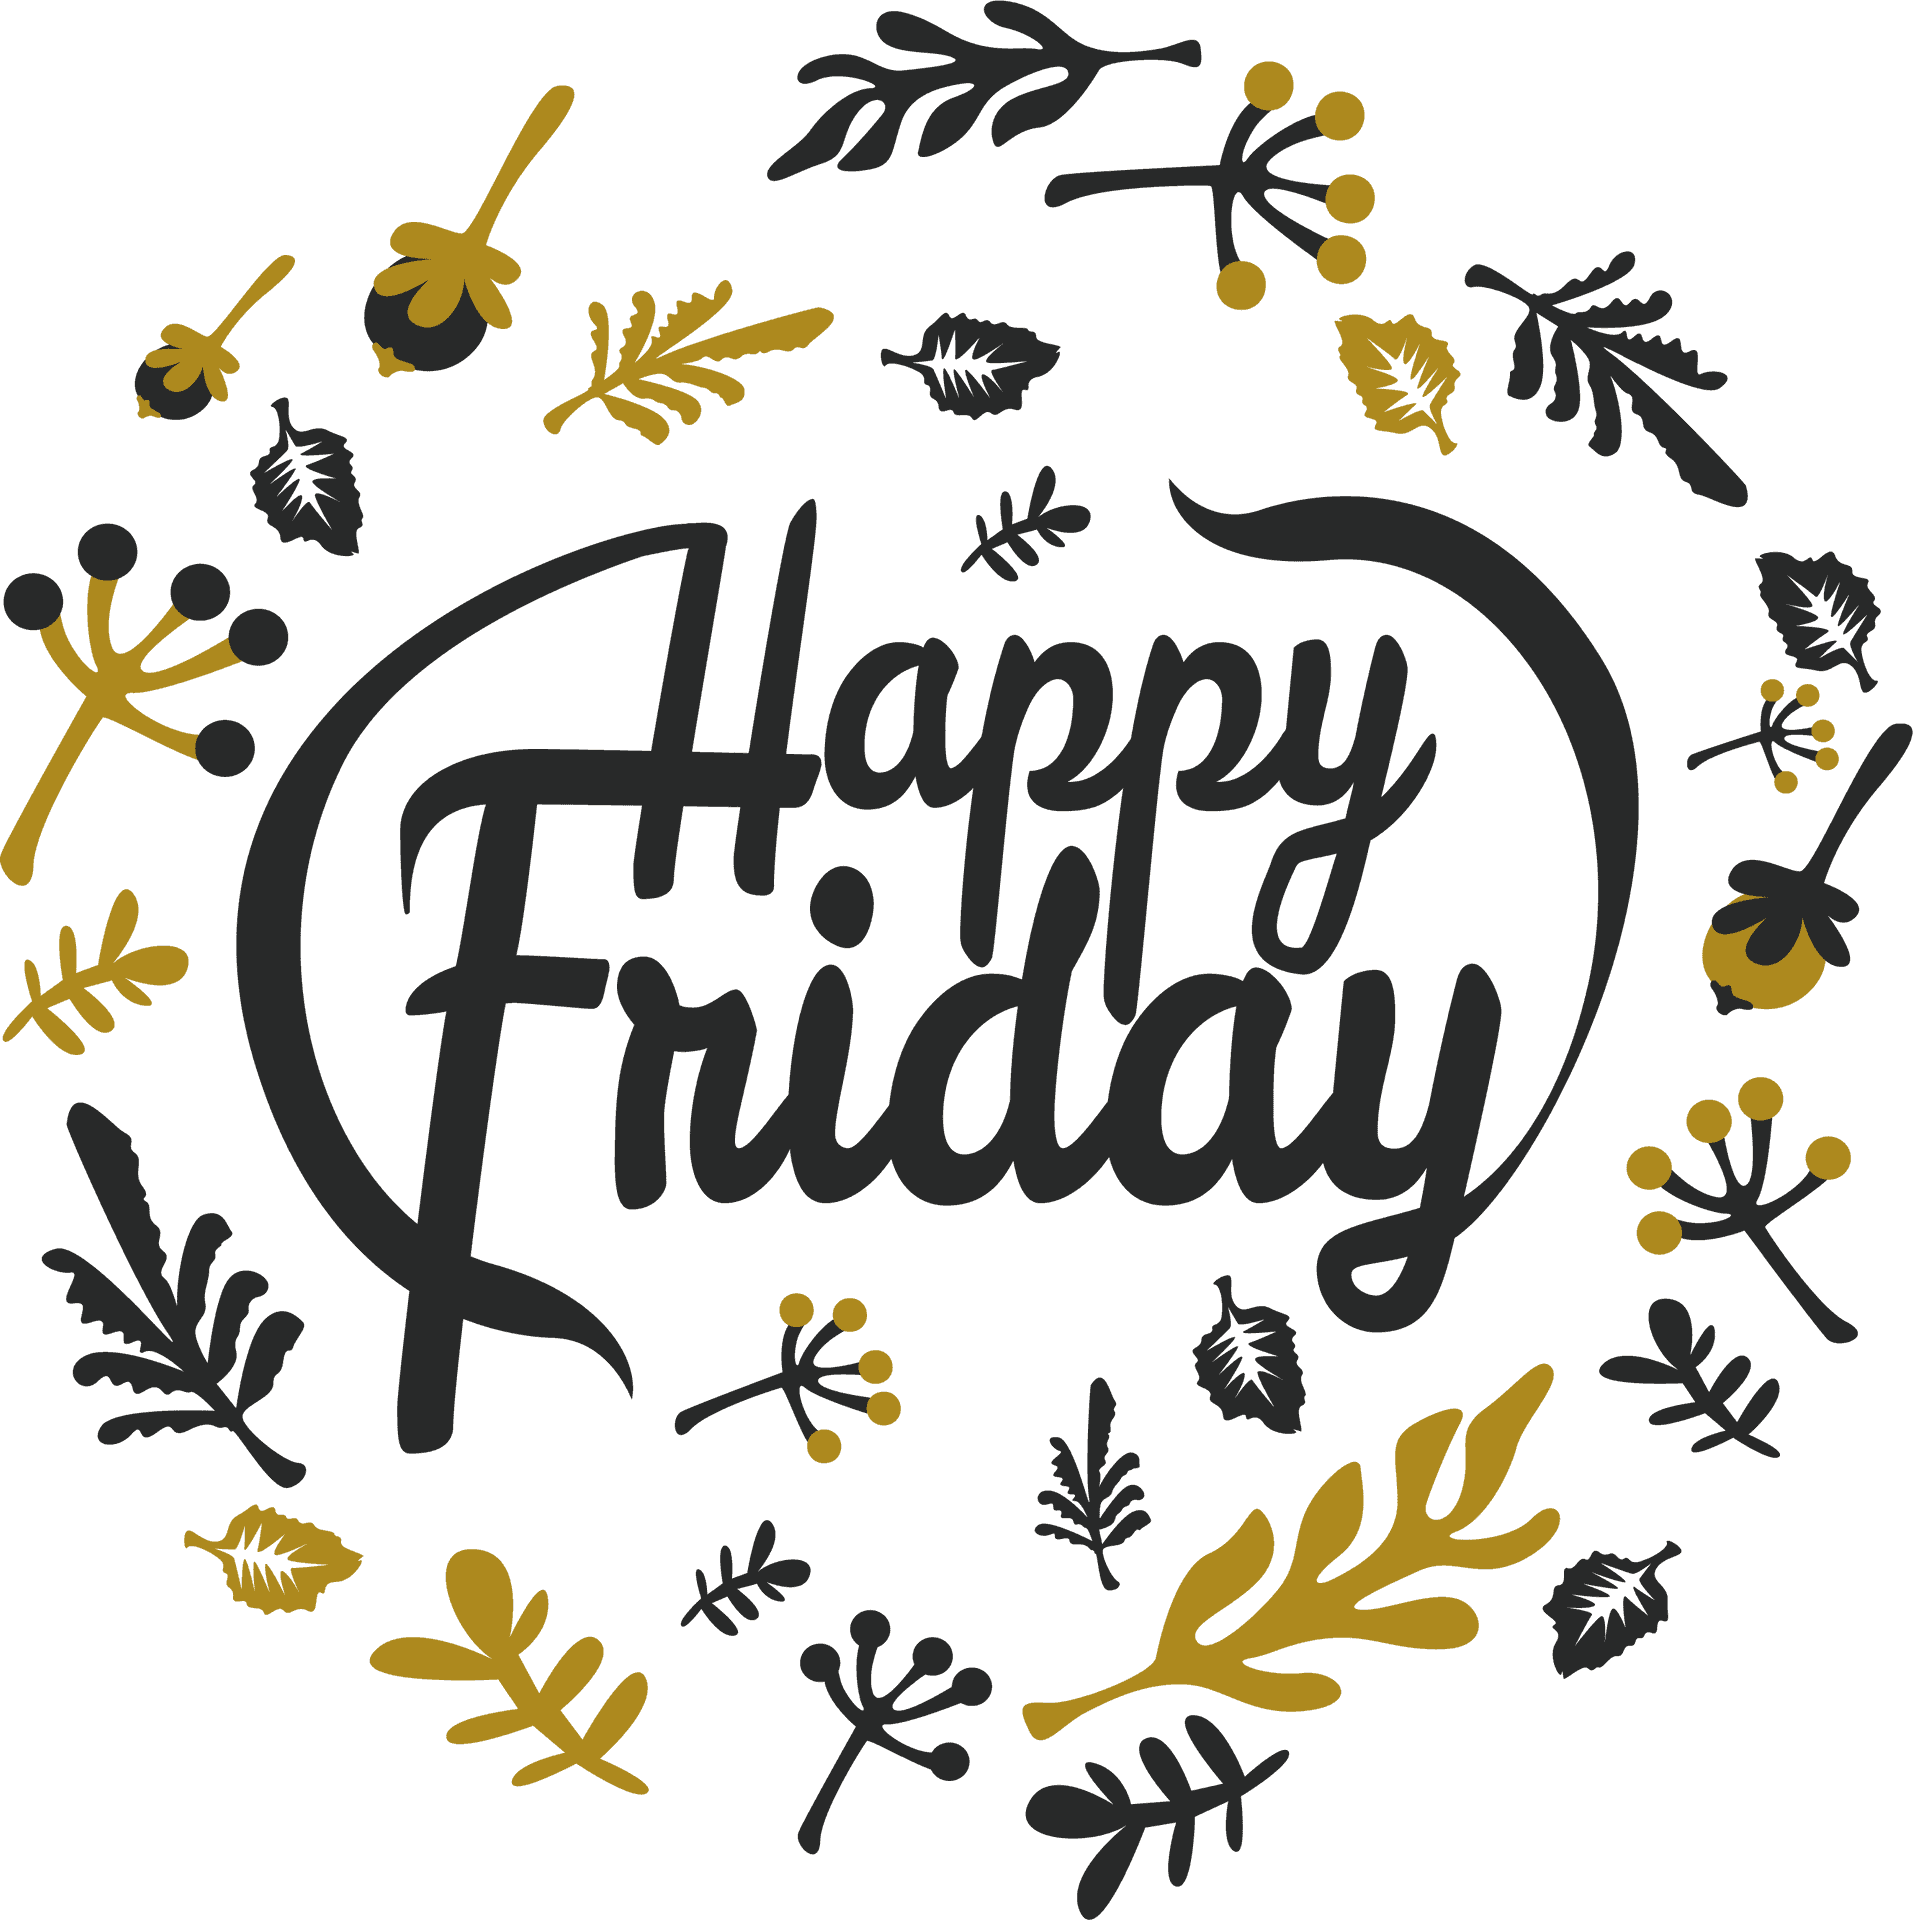 Happy Friday Floral Greeting PNG image